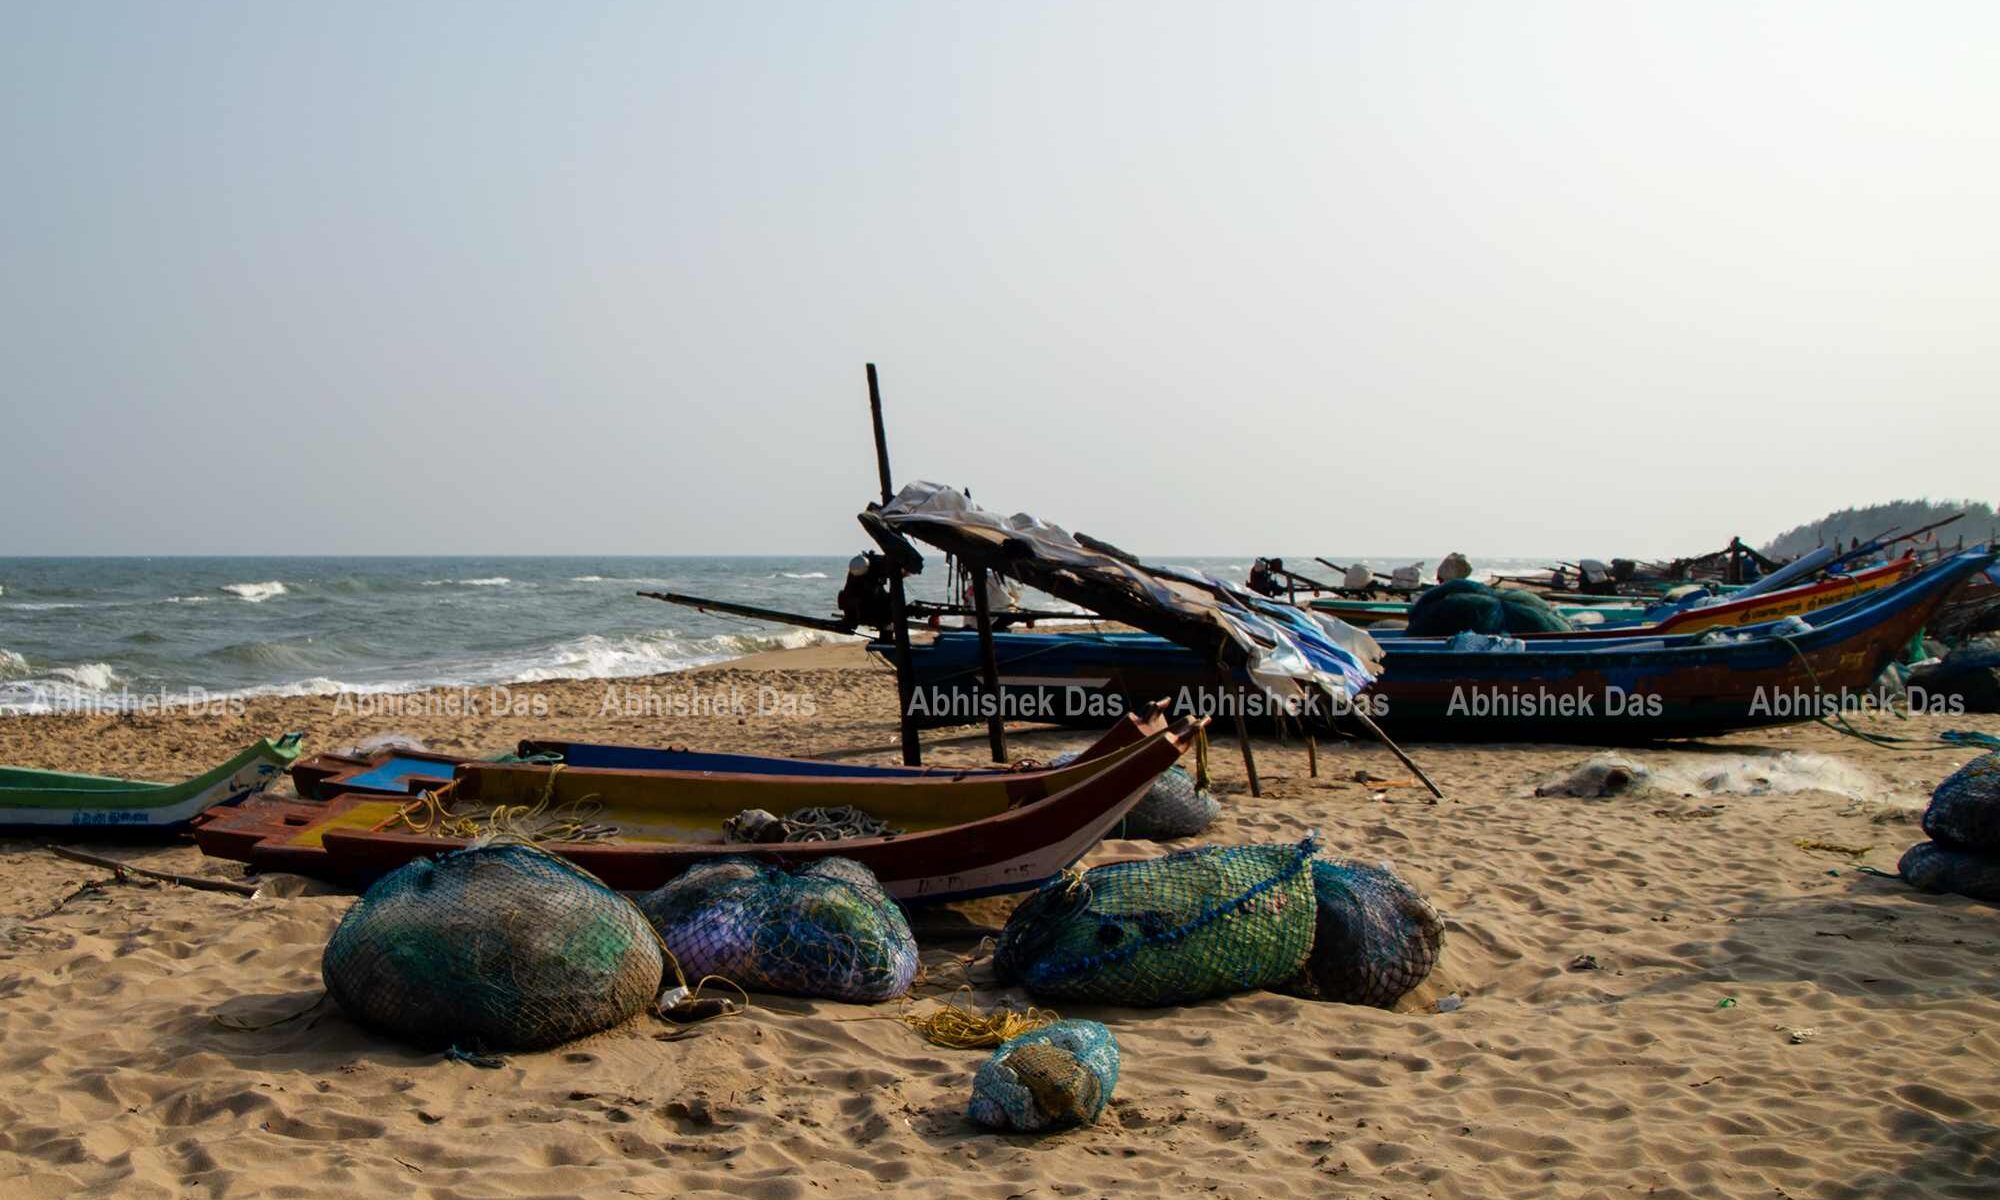 Veerampattinam Beach has the pretty lengthy sea beach surrounded by extensive Palm Groves adding sublimity to the scenic beauty.